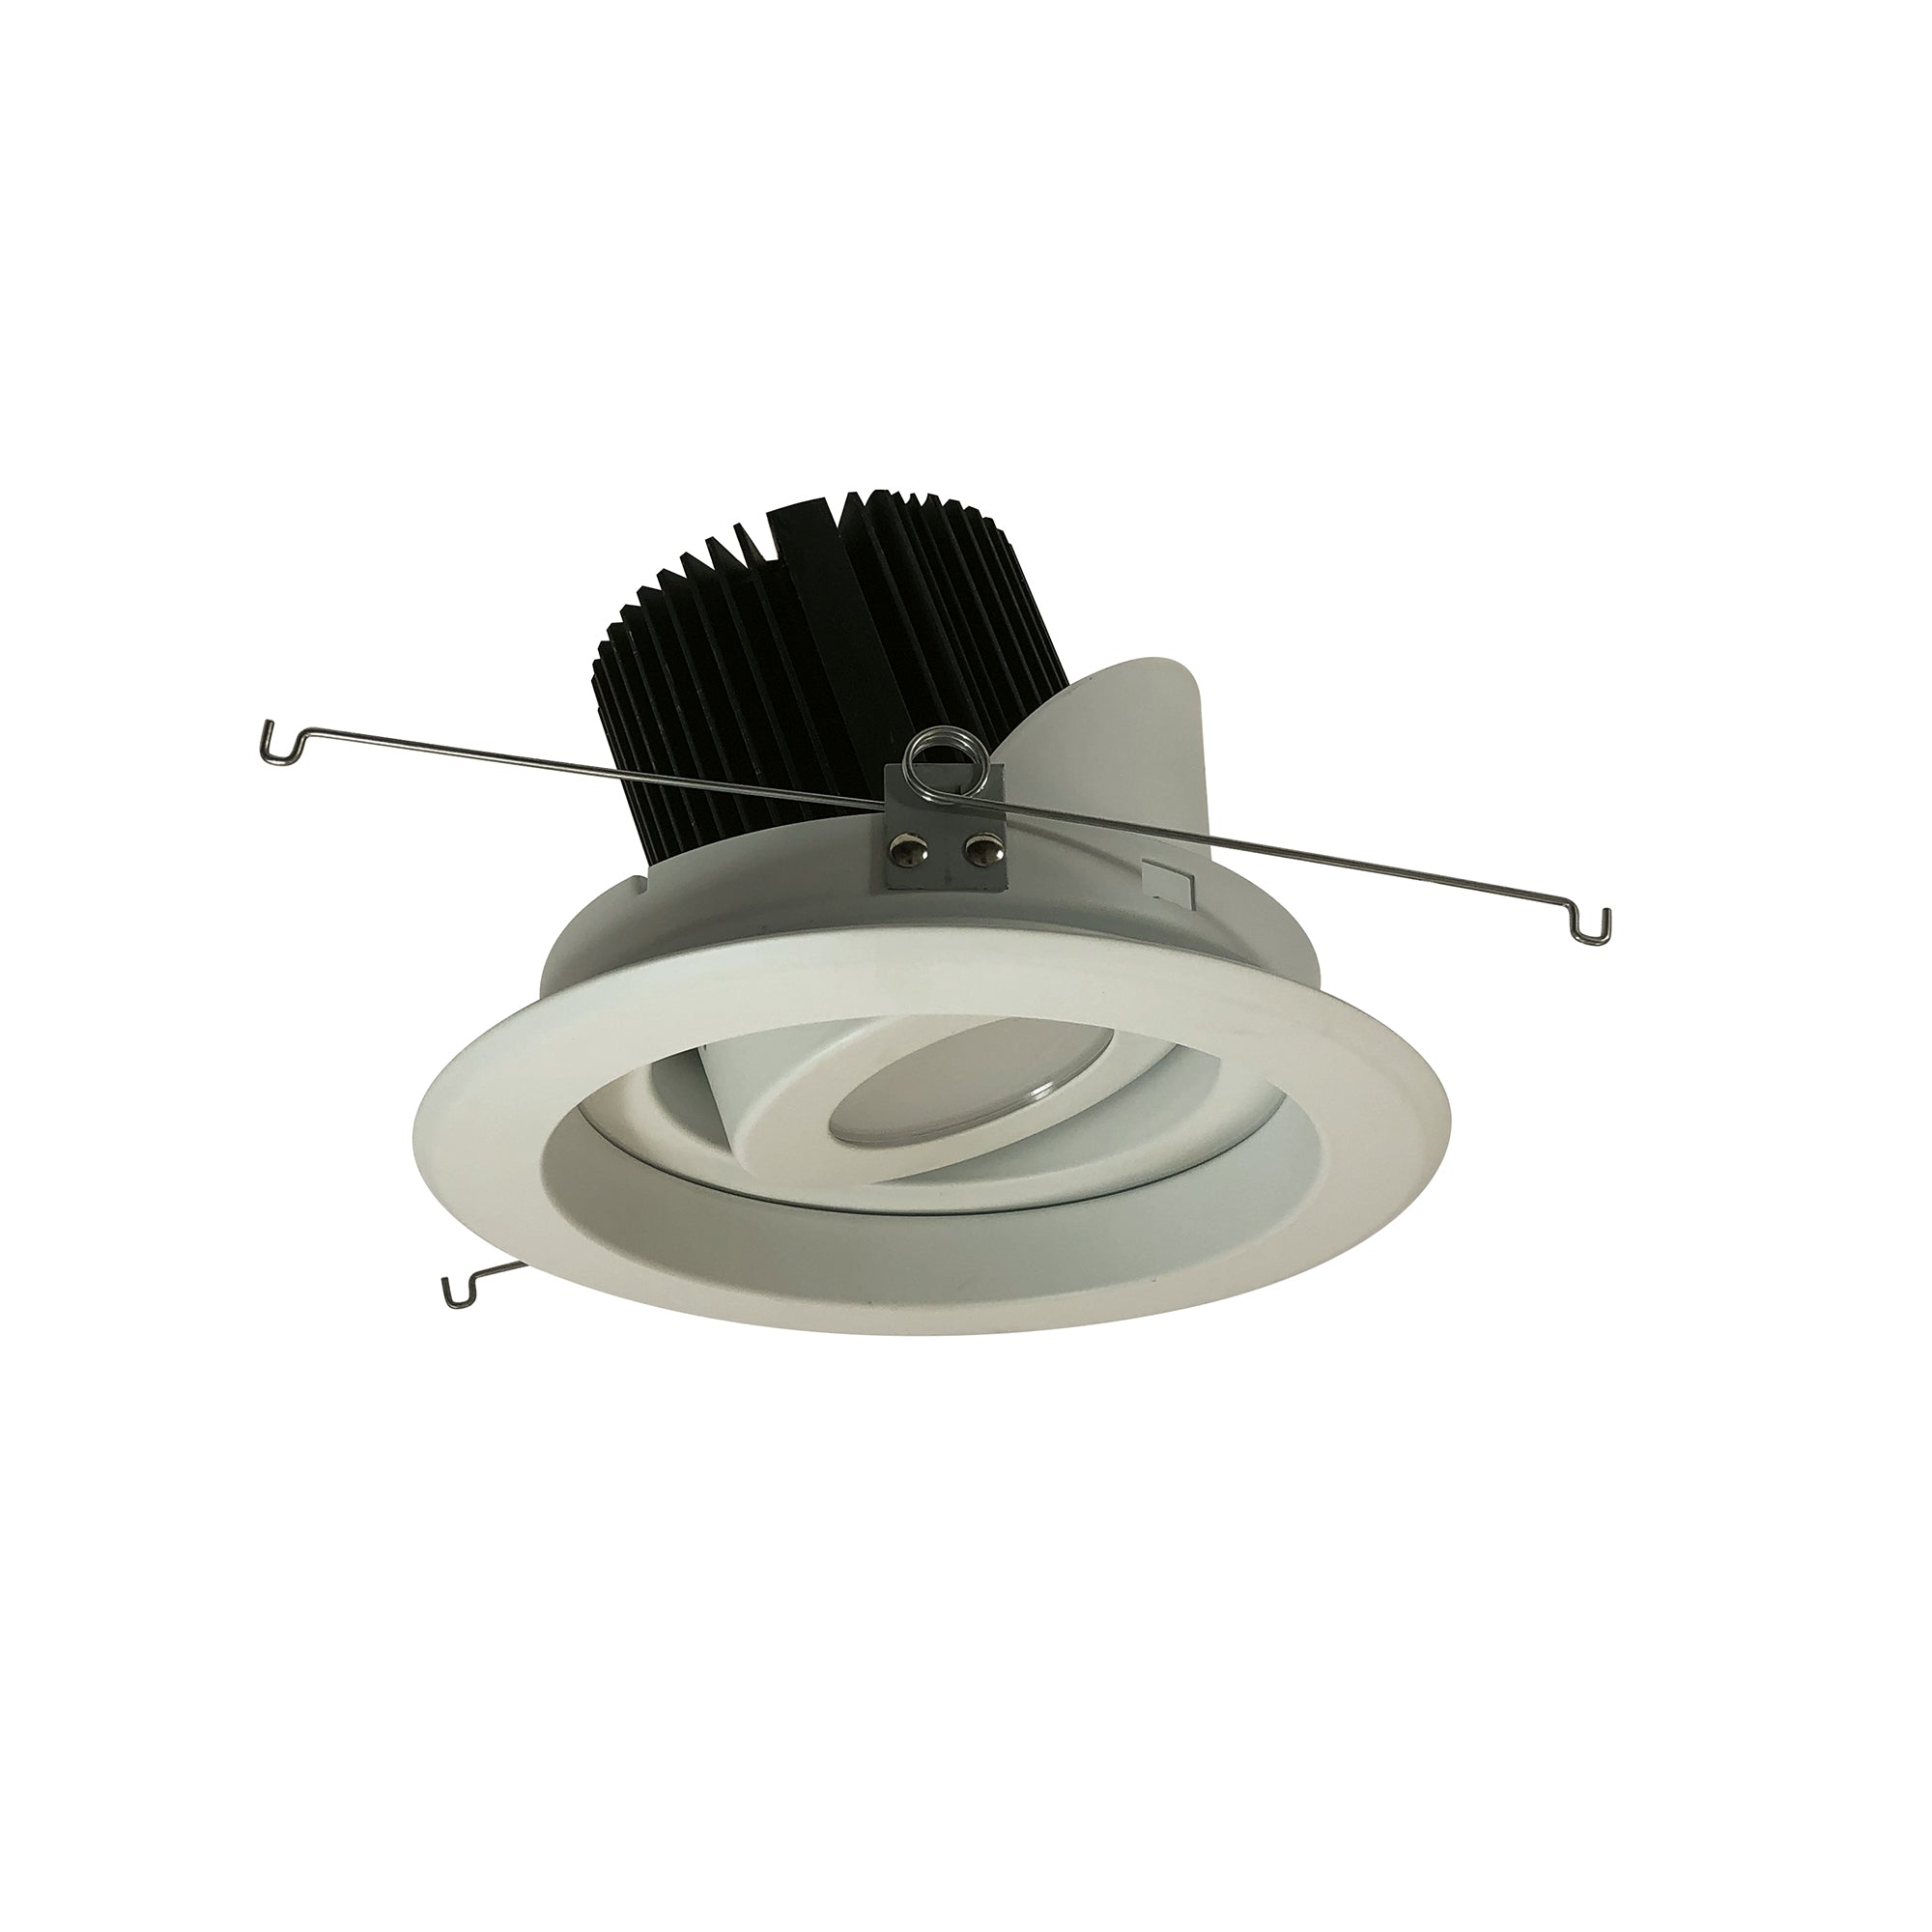 Nora Lighting NRM2-619L2530FWW - Recessed - 6 Inch Marquise II Round Regressed Adj. Reflector, Flood, 2500lm, 3000K, White (Not Compatible with NHRM2-625 Housings)